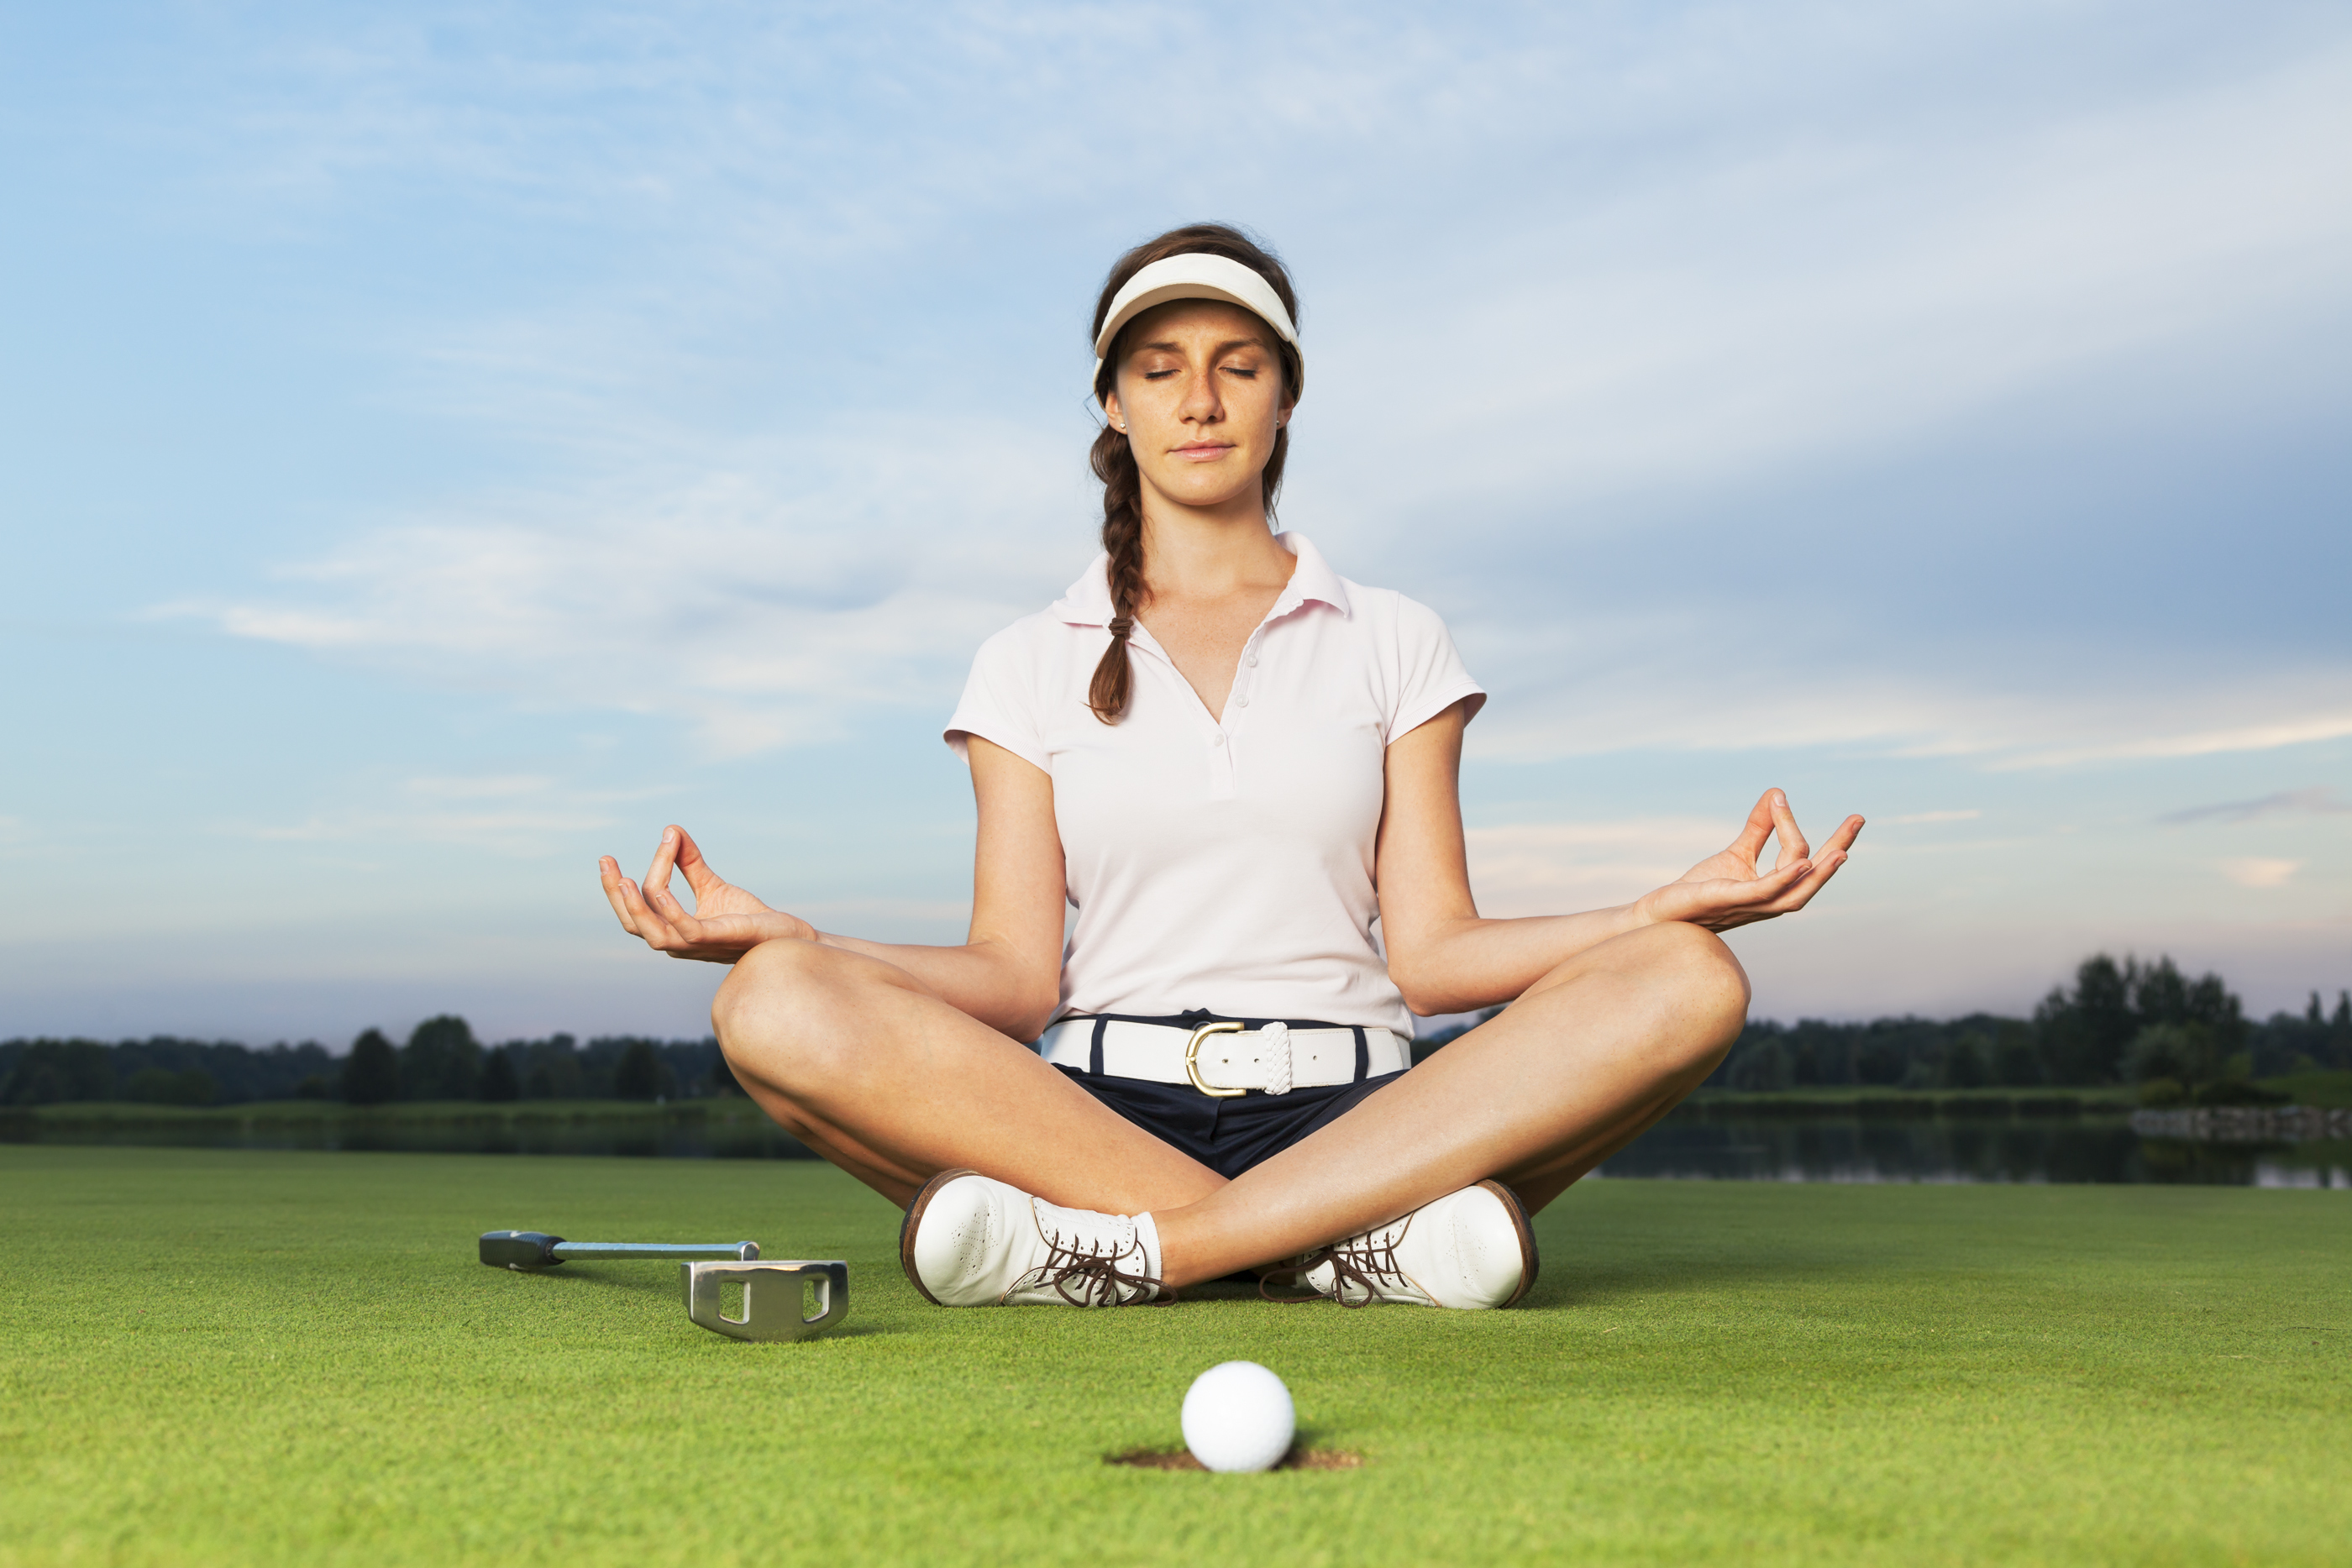 Yoga for Golfers: 3 Poses You Should Practice